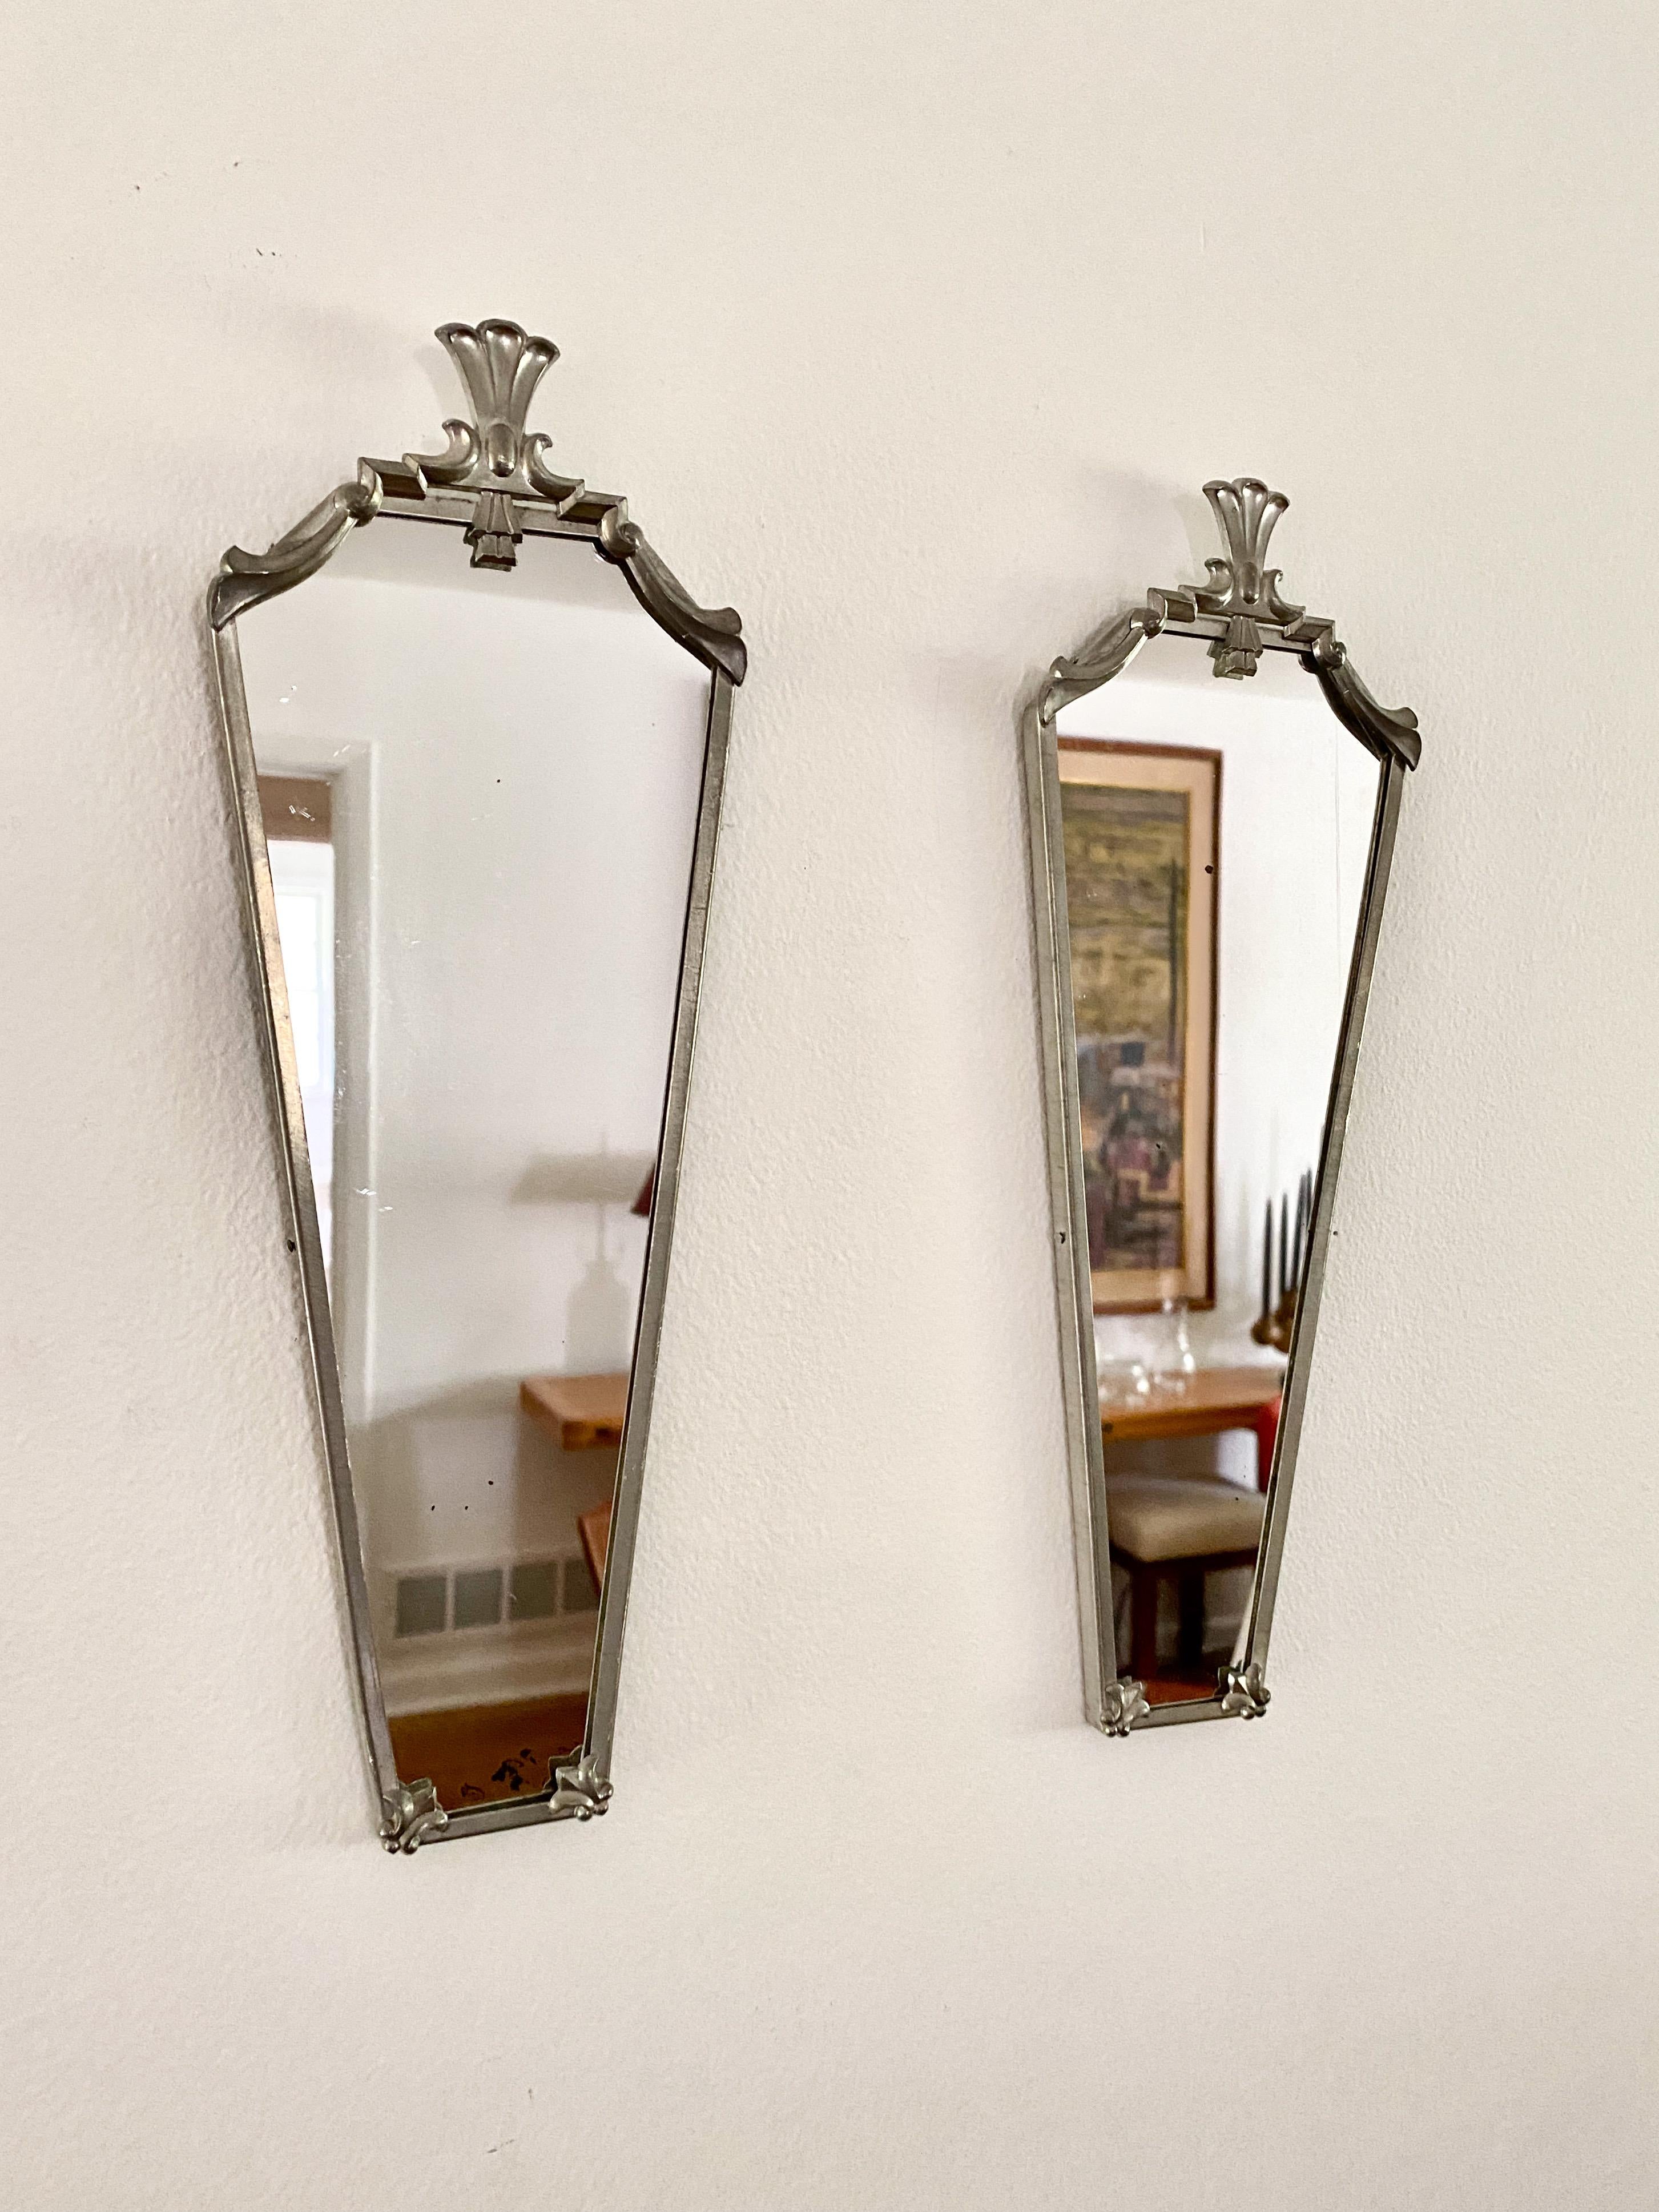 A pair of diminutive mirrors probably made in the 1920's - 1930's for Svenskt Tenn in Sweden.  The mirrors appear to made of a matte finish white / pewter type metal.  The mirrors are attributed to either Nils Fougstedt or Edvin Ollers and are in